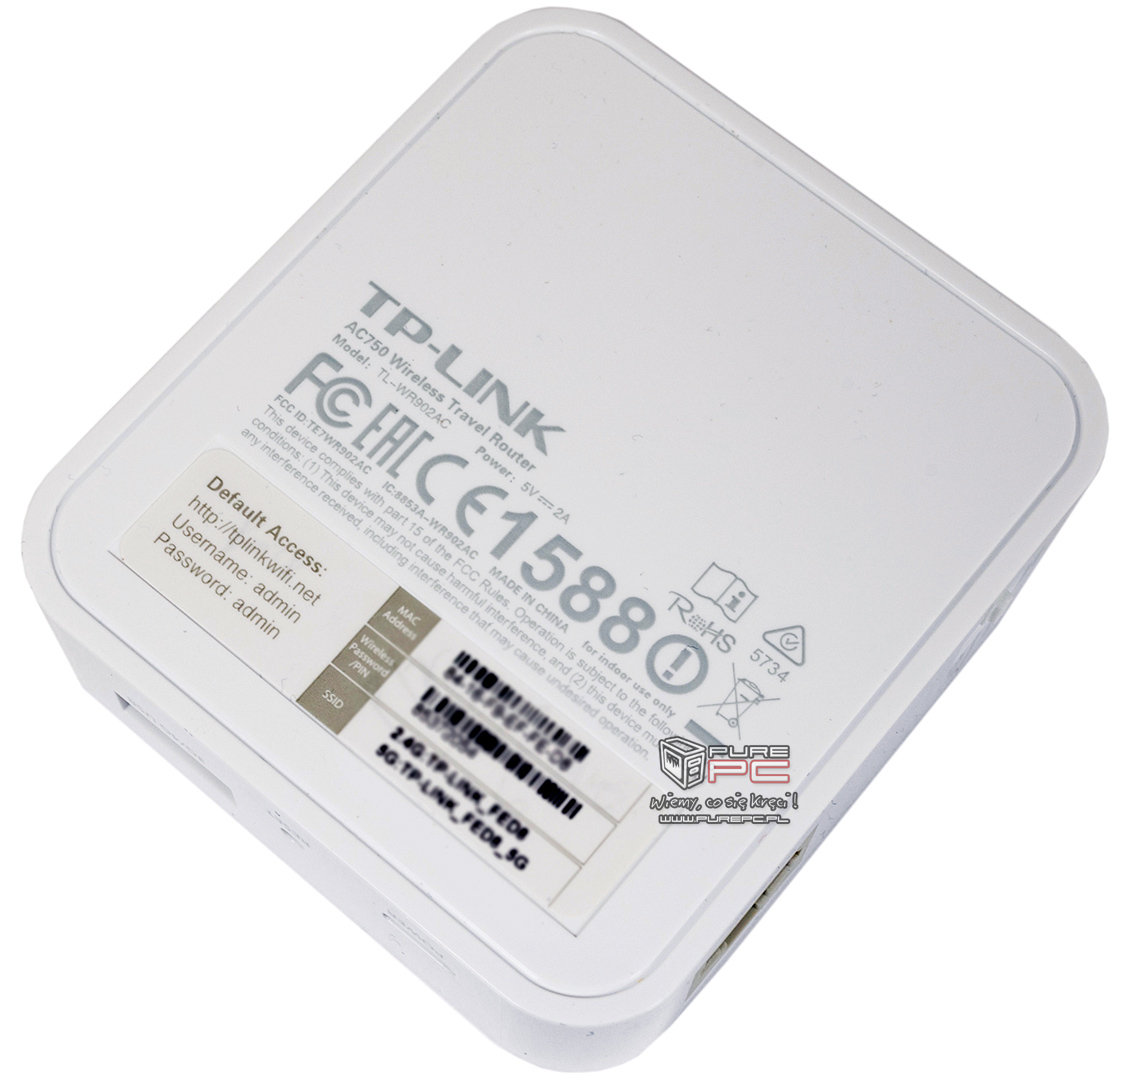 TL-WR902AC, AC750 Wireless Travel Router